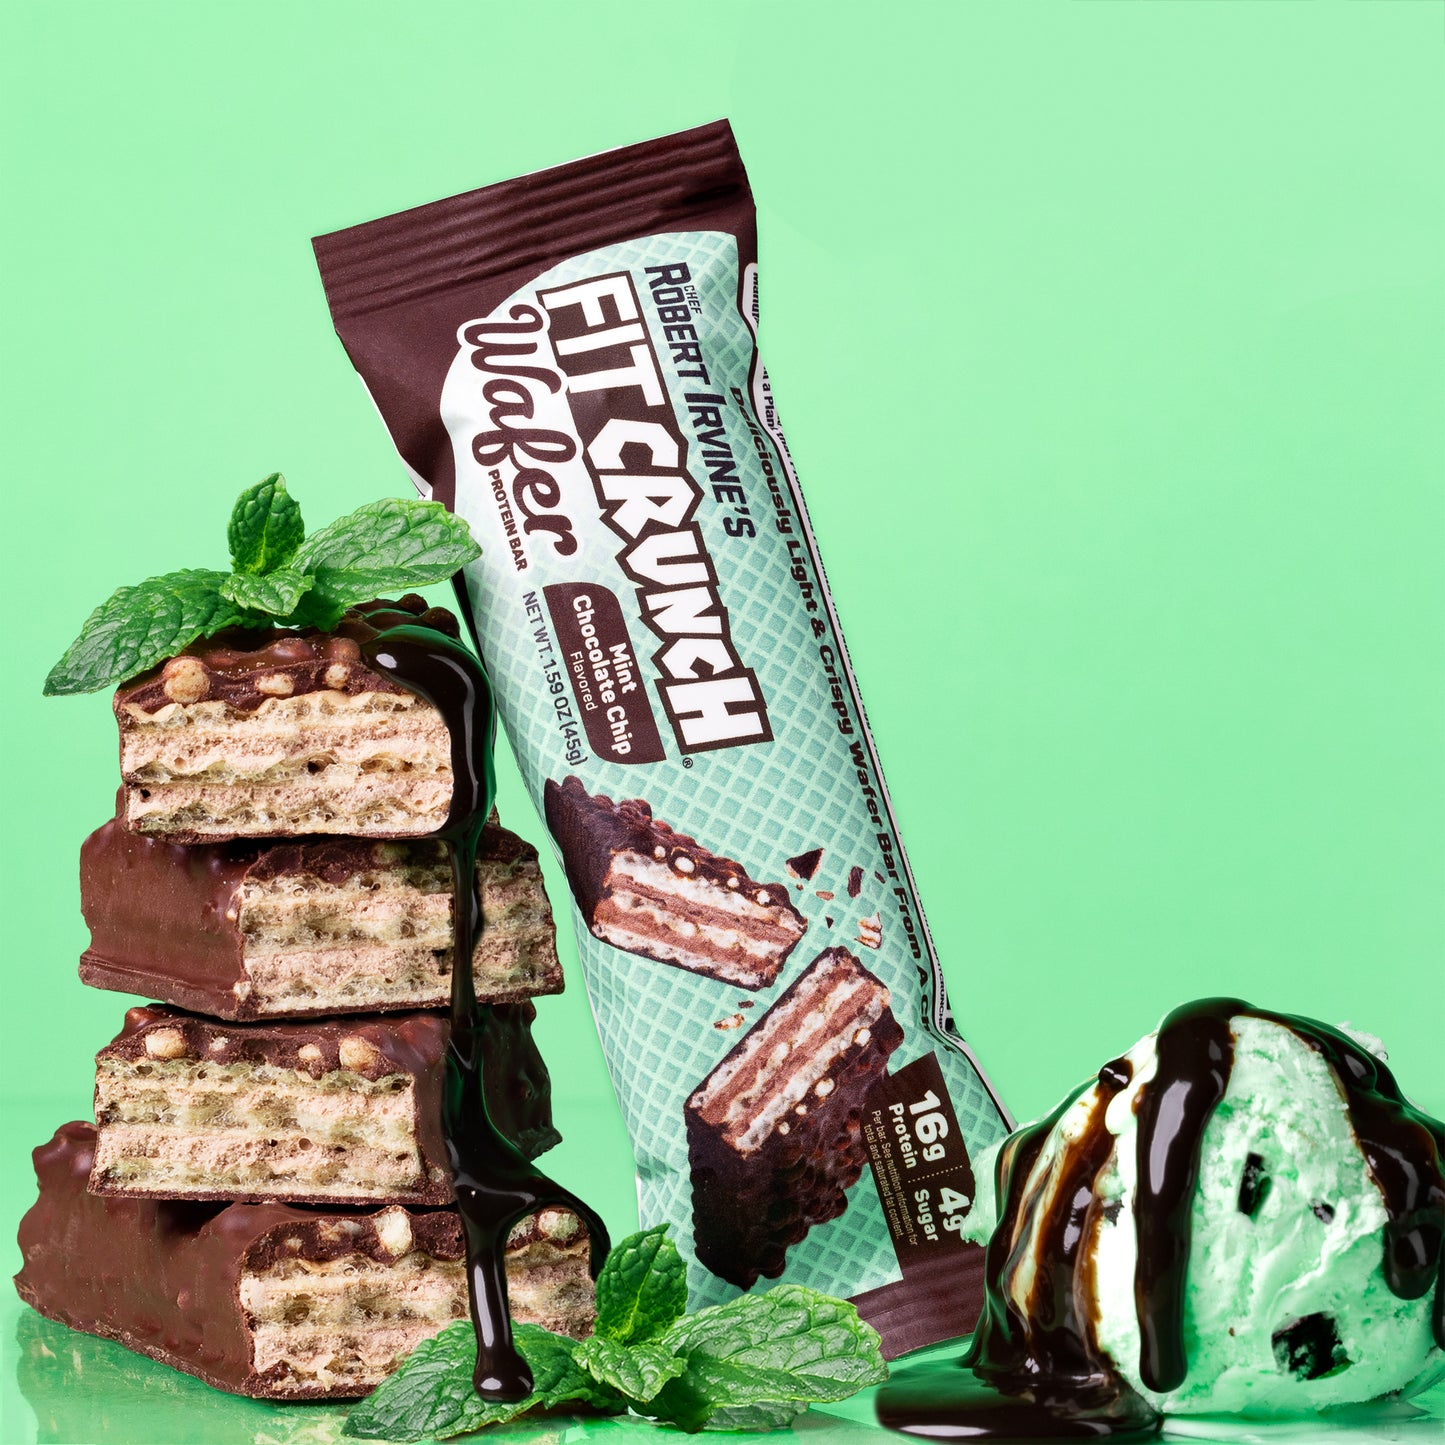 
                  
                    FITCRUNCH Wafer Protein Bars Mint Chocolate Chip (9ct)
                  
                